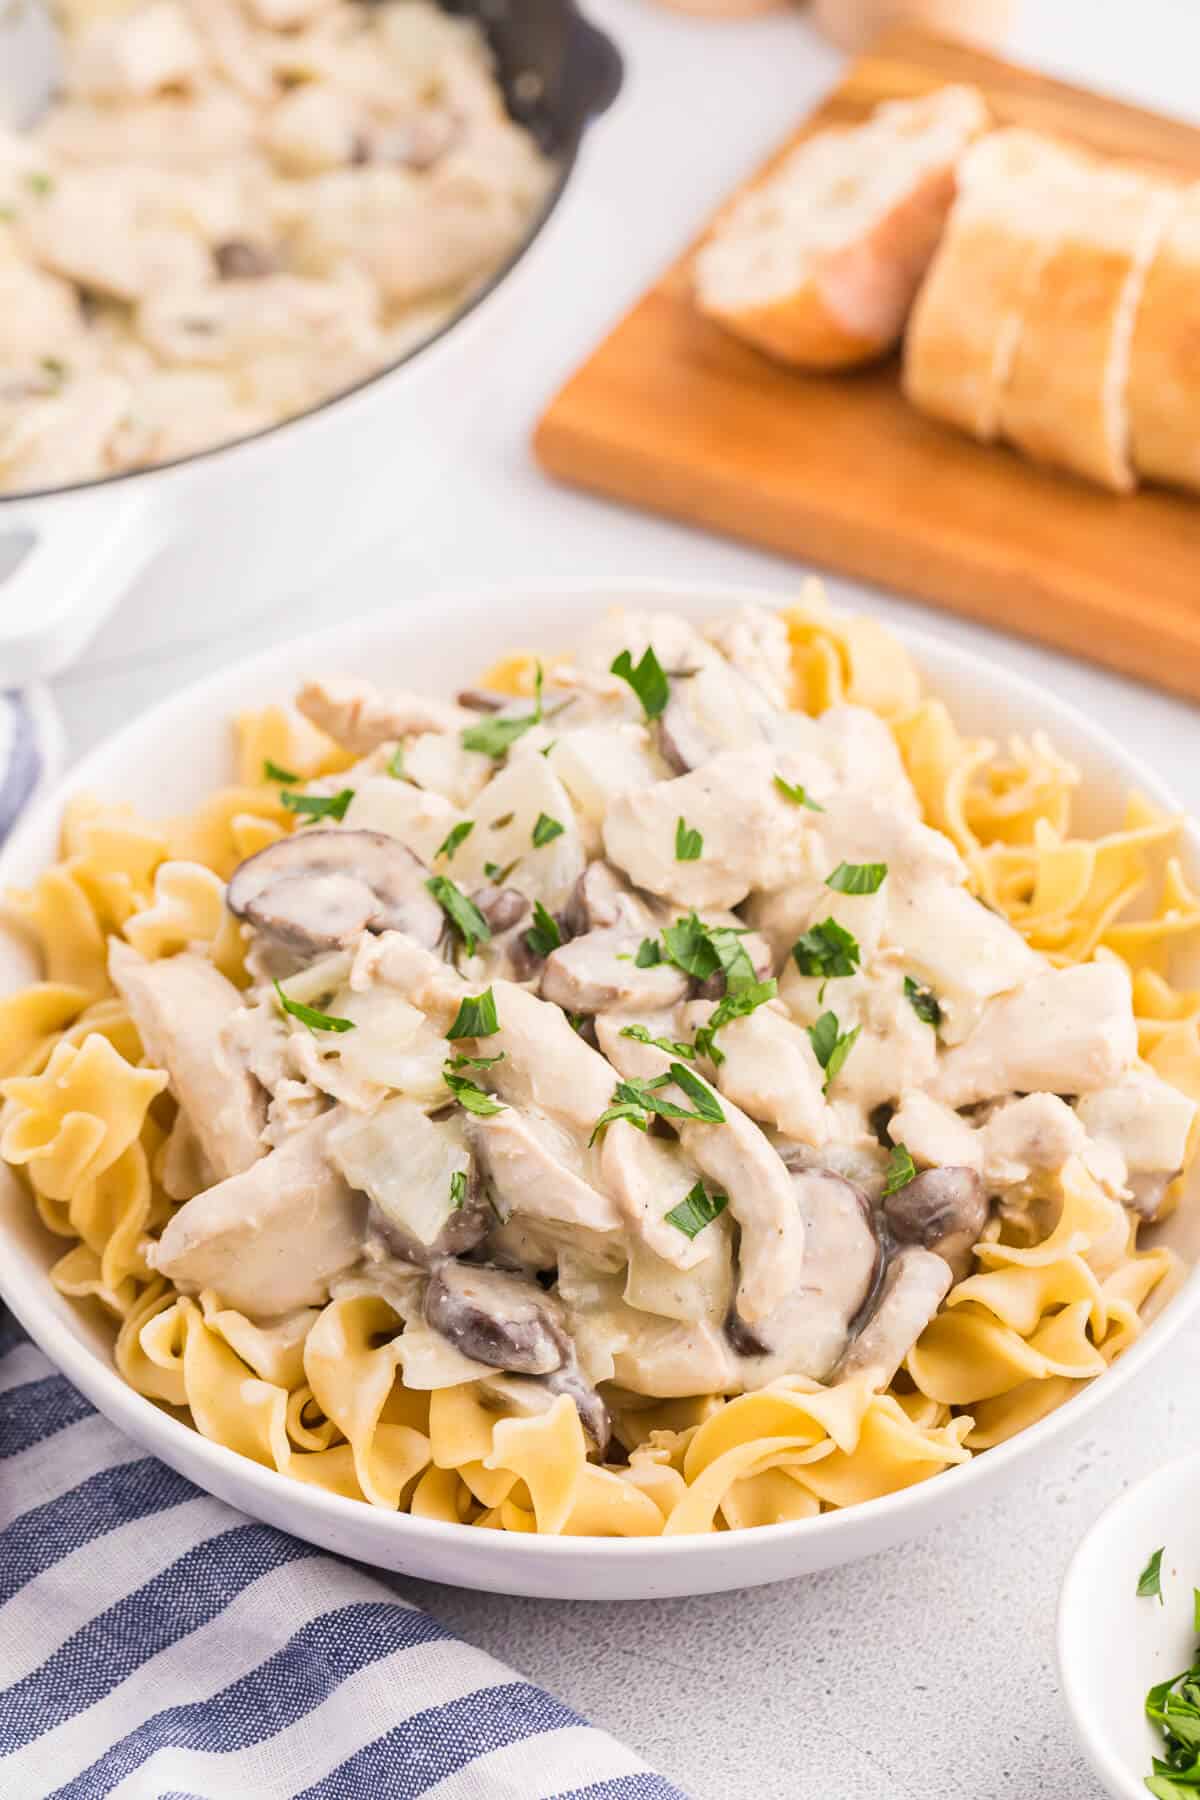 Creamy garlic chicken with noodles in a white bowl.